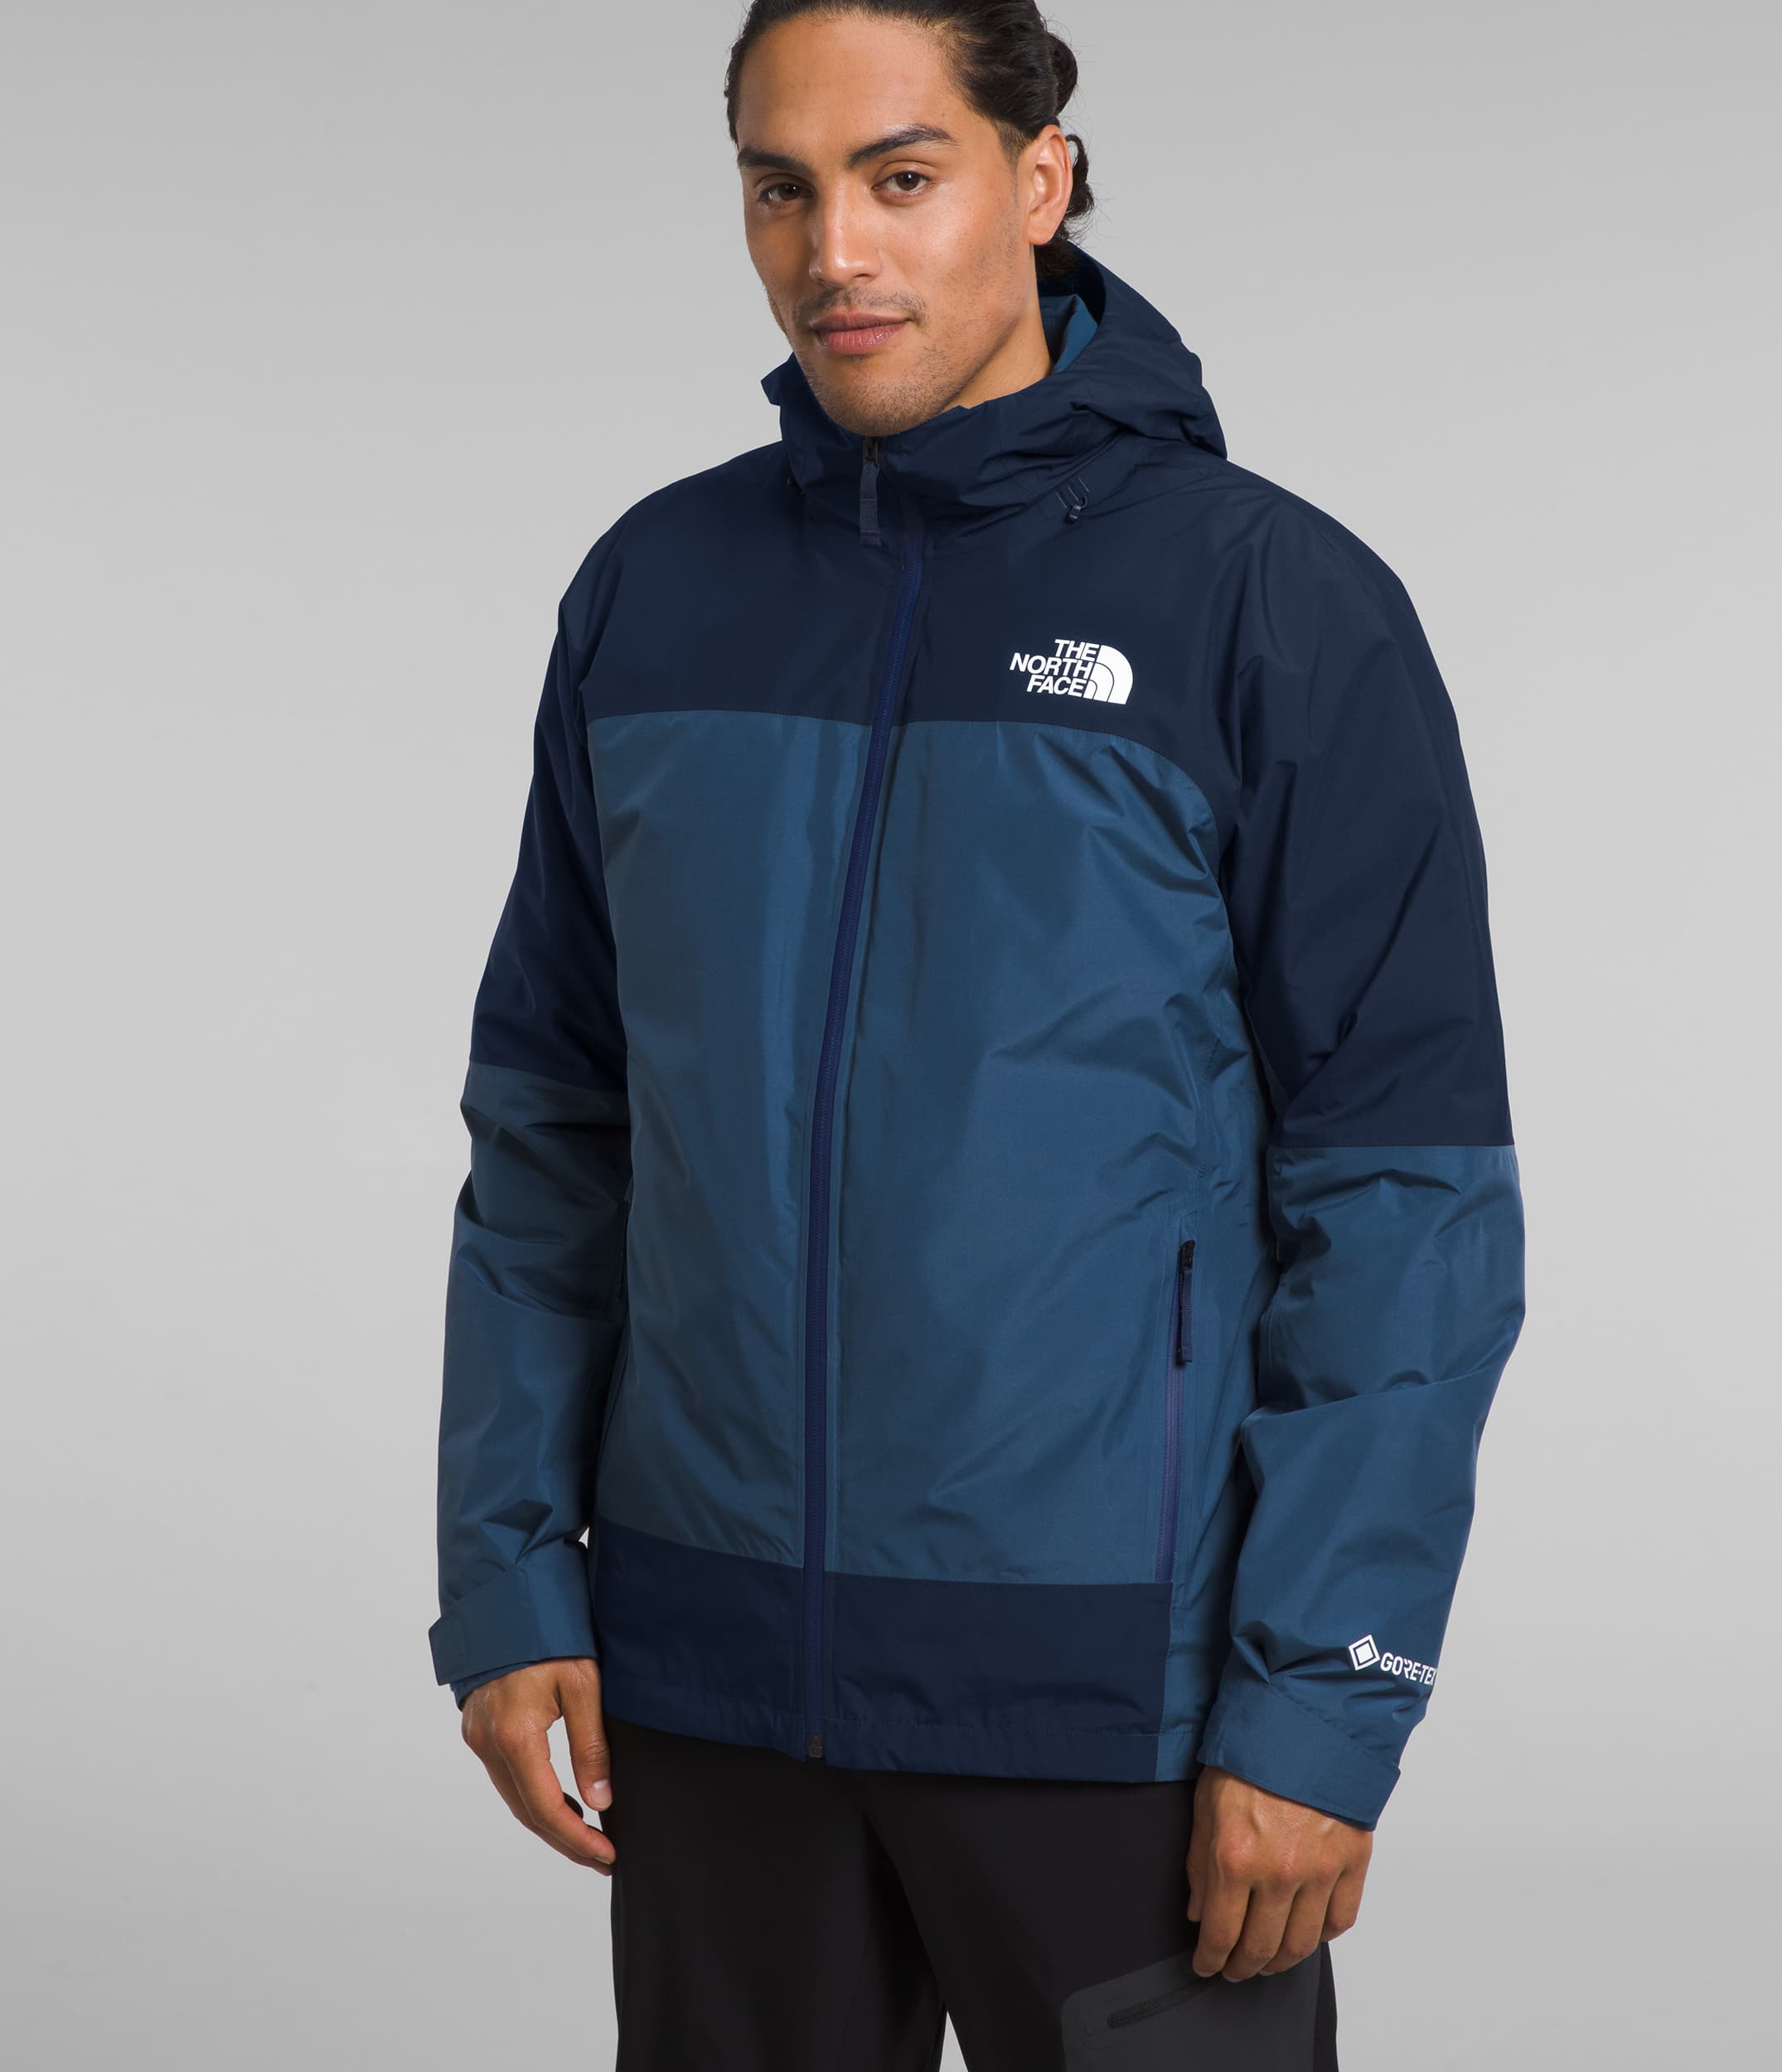 The North Face Men's Mountain Light Triclimate Gore-Tex Jacket